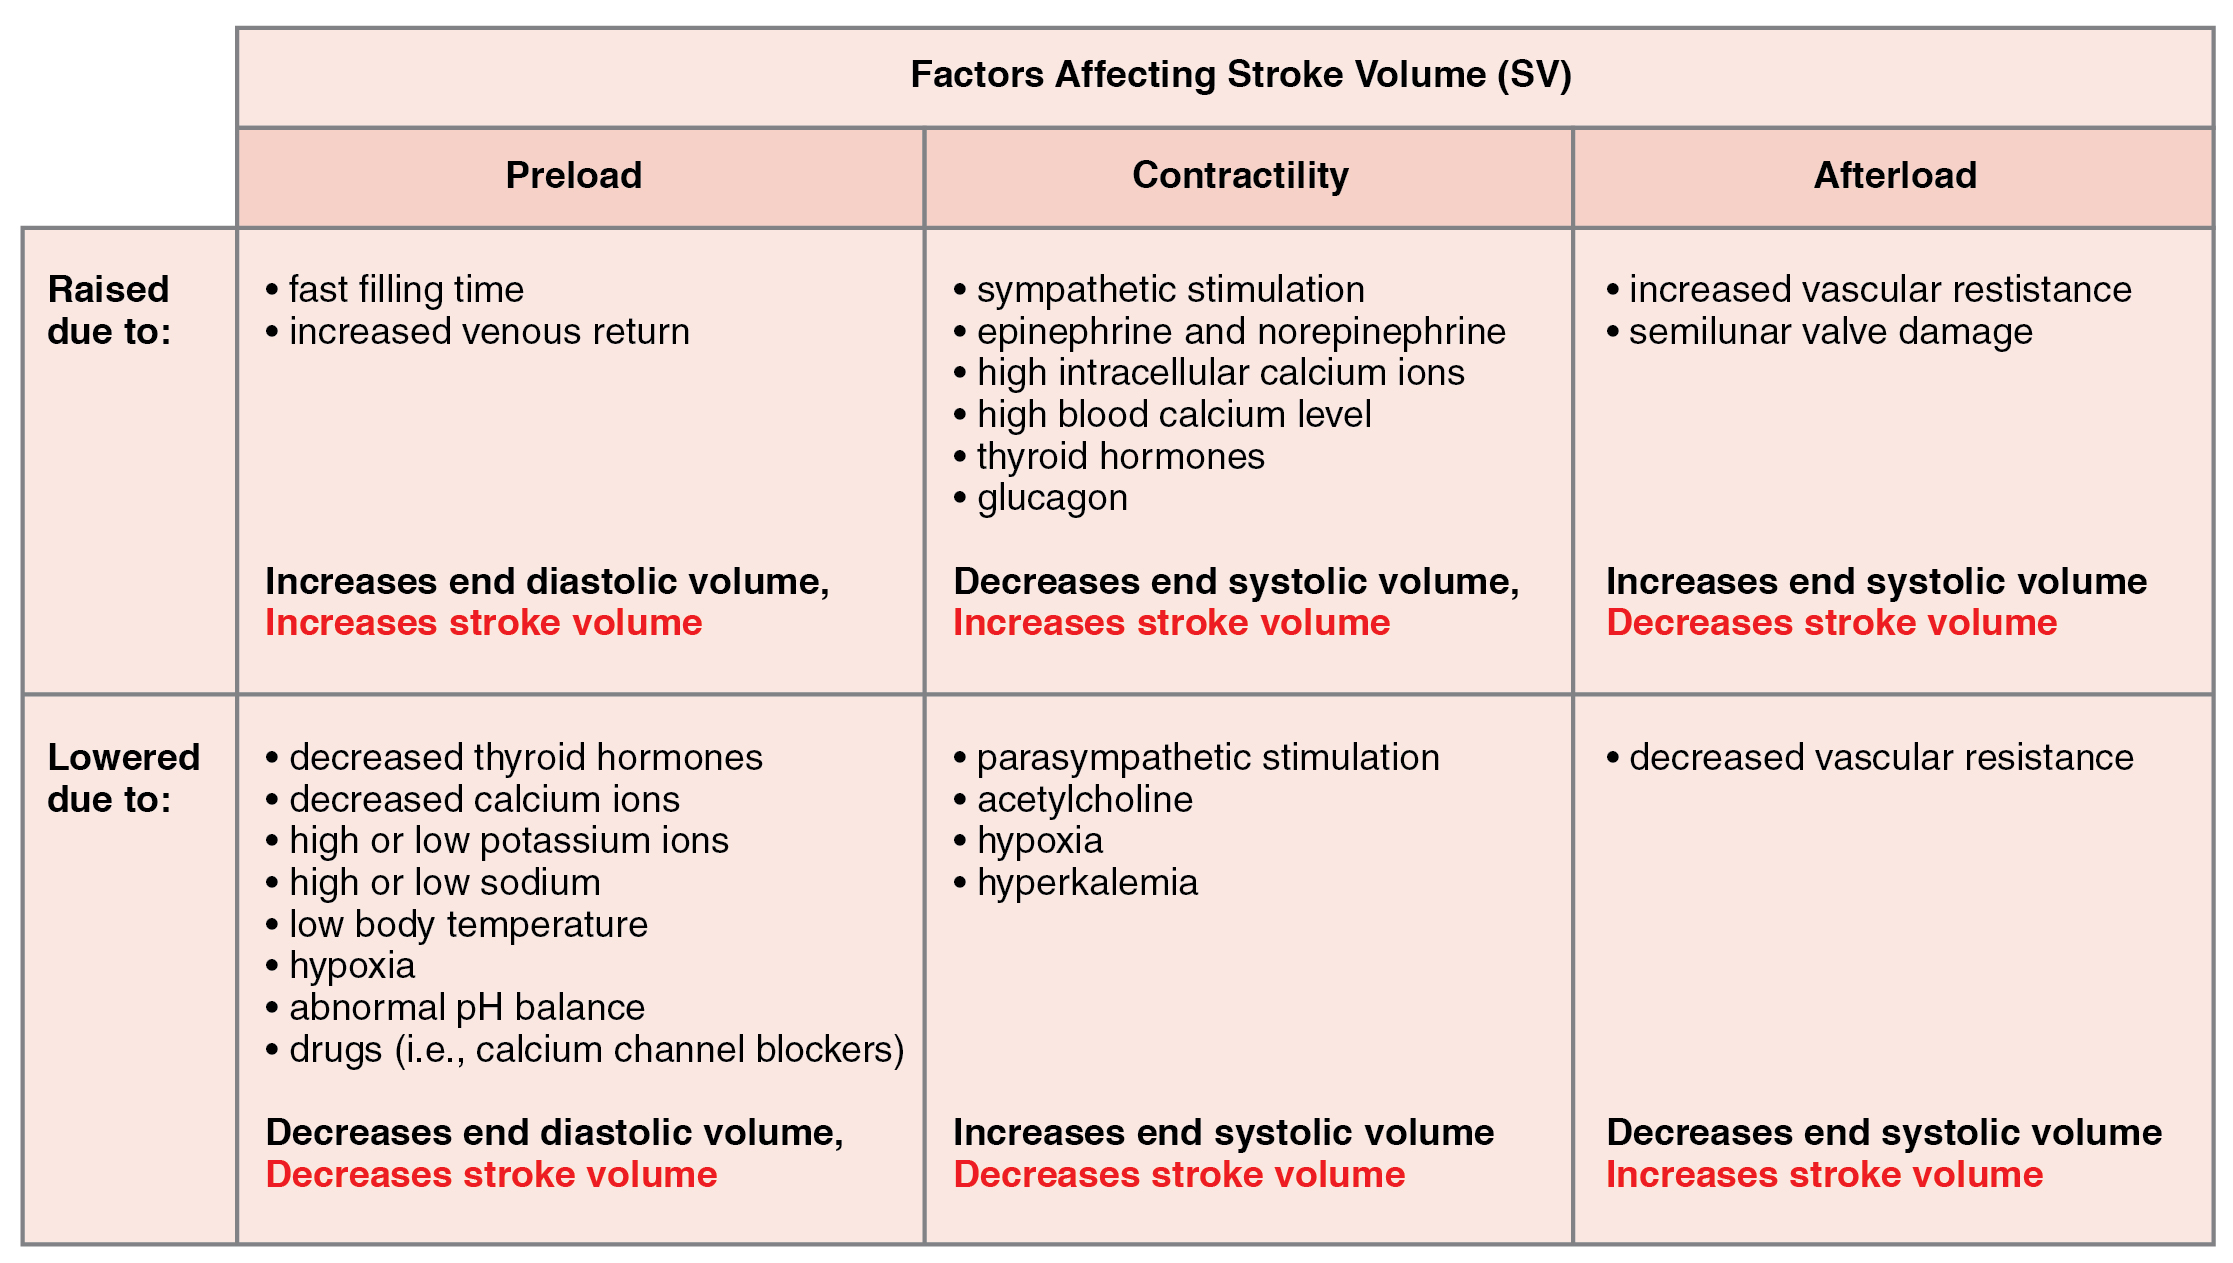 This table describes major factors influencing stroke volume. Preload may be raised due to fast filling time or increased venous return. These factors increase end diastolic volume and increase stroke volume. Preload may be lowered due to decreased thyroid hormones, decreased calcium ions, high or low potassium ions, high or low sodium, low body temperature, hypoxia, abnormal pH balance, or drugs (for example, calcium channel blockers). These factors decrease end diastolic volume and decrease stroke volume. Contractility may be raised due to sympathetic stimulation, epinephrine and norepinephrine, high intracellular calcium ions, high blood calcium level, thyroid hormones, or glucagon. These factors decrease end systolic volume and increase stroke volume. Contractility may be lowered due to parasympathetic stimulation, acetylcholine, hypoxia, or hyperkalemia. These factors increase end systolic volume and decrease stroke volume. Afterload may be raised due to increased vascular resistance or semilunar valve damage. These factors increase end systolic volume and decrease stroke volume. Afterload may be lowered due to decreased vascular resistance. This factor decreases end systolic volume and increases stroke volume.